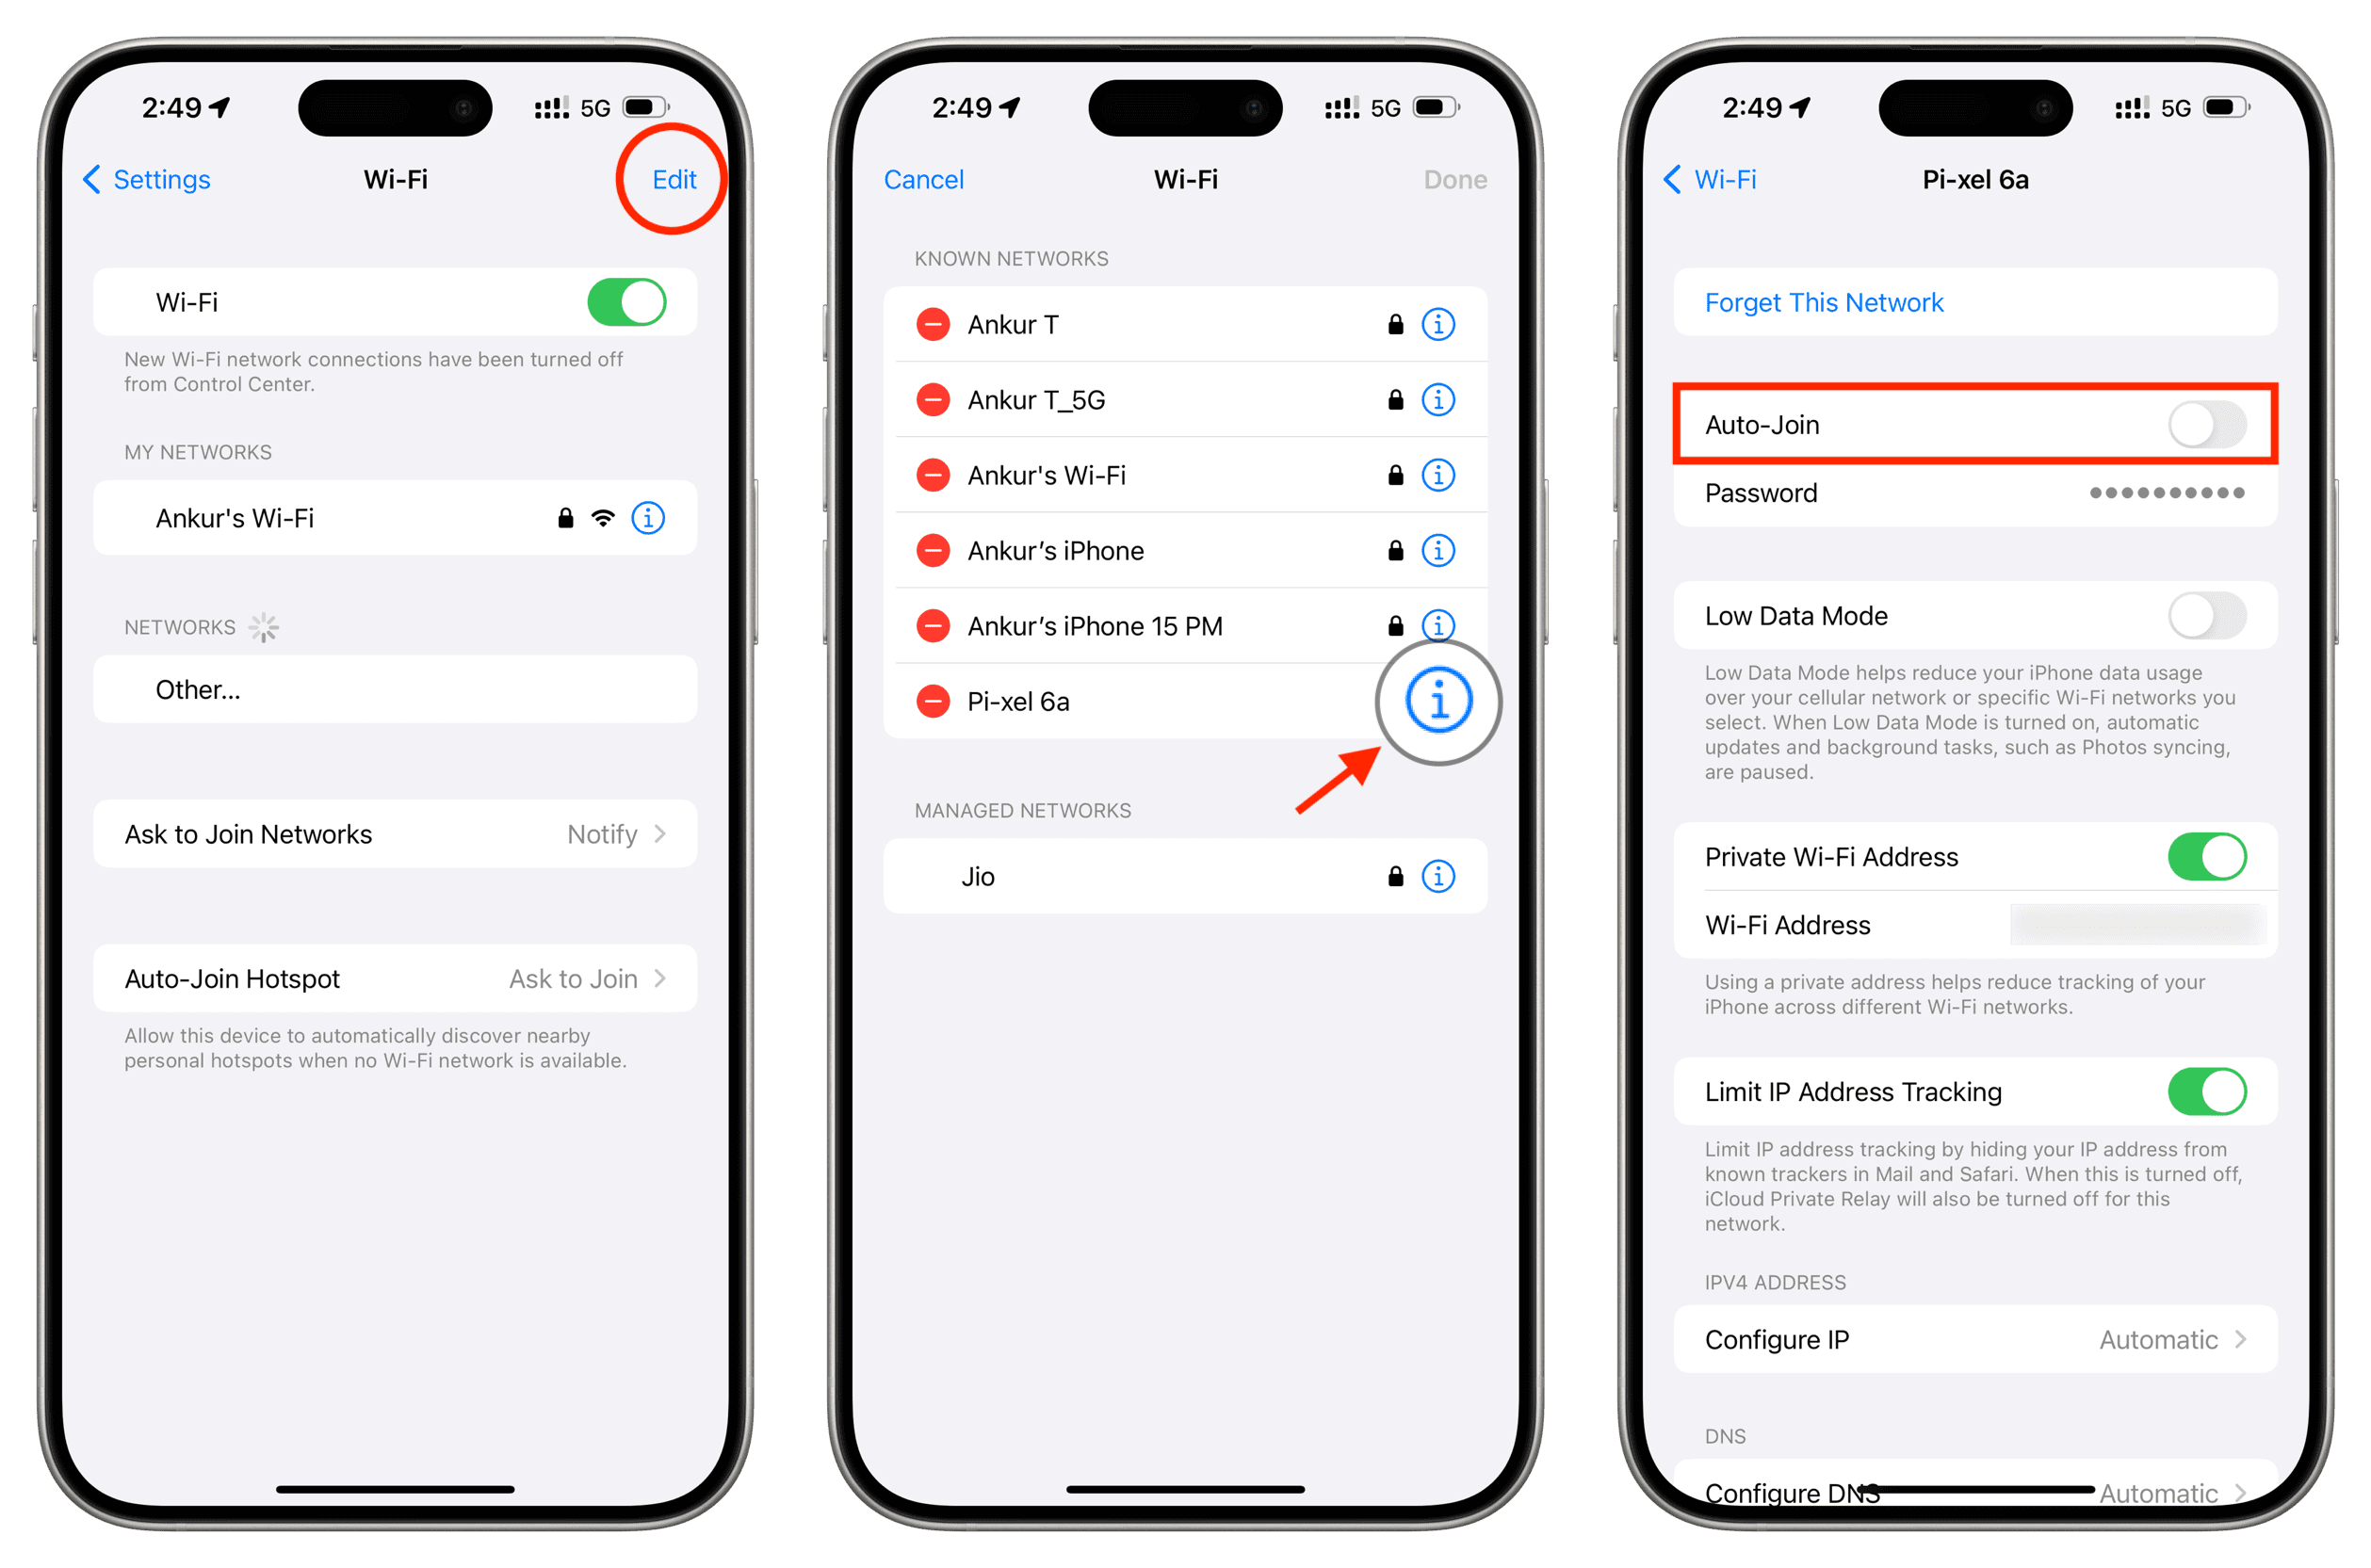 Stop Auto-Join for a Wi-Fi network on iPhone